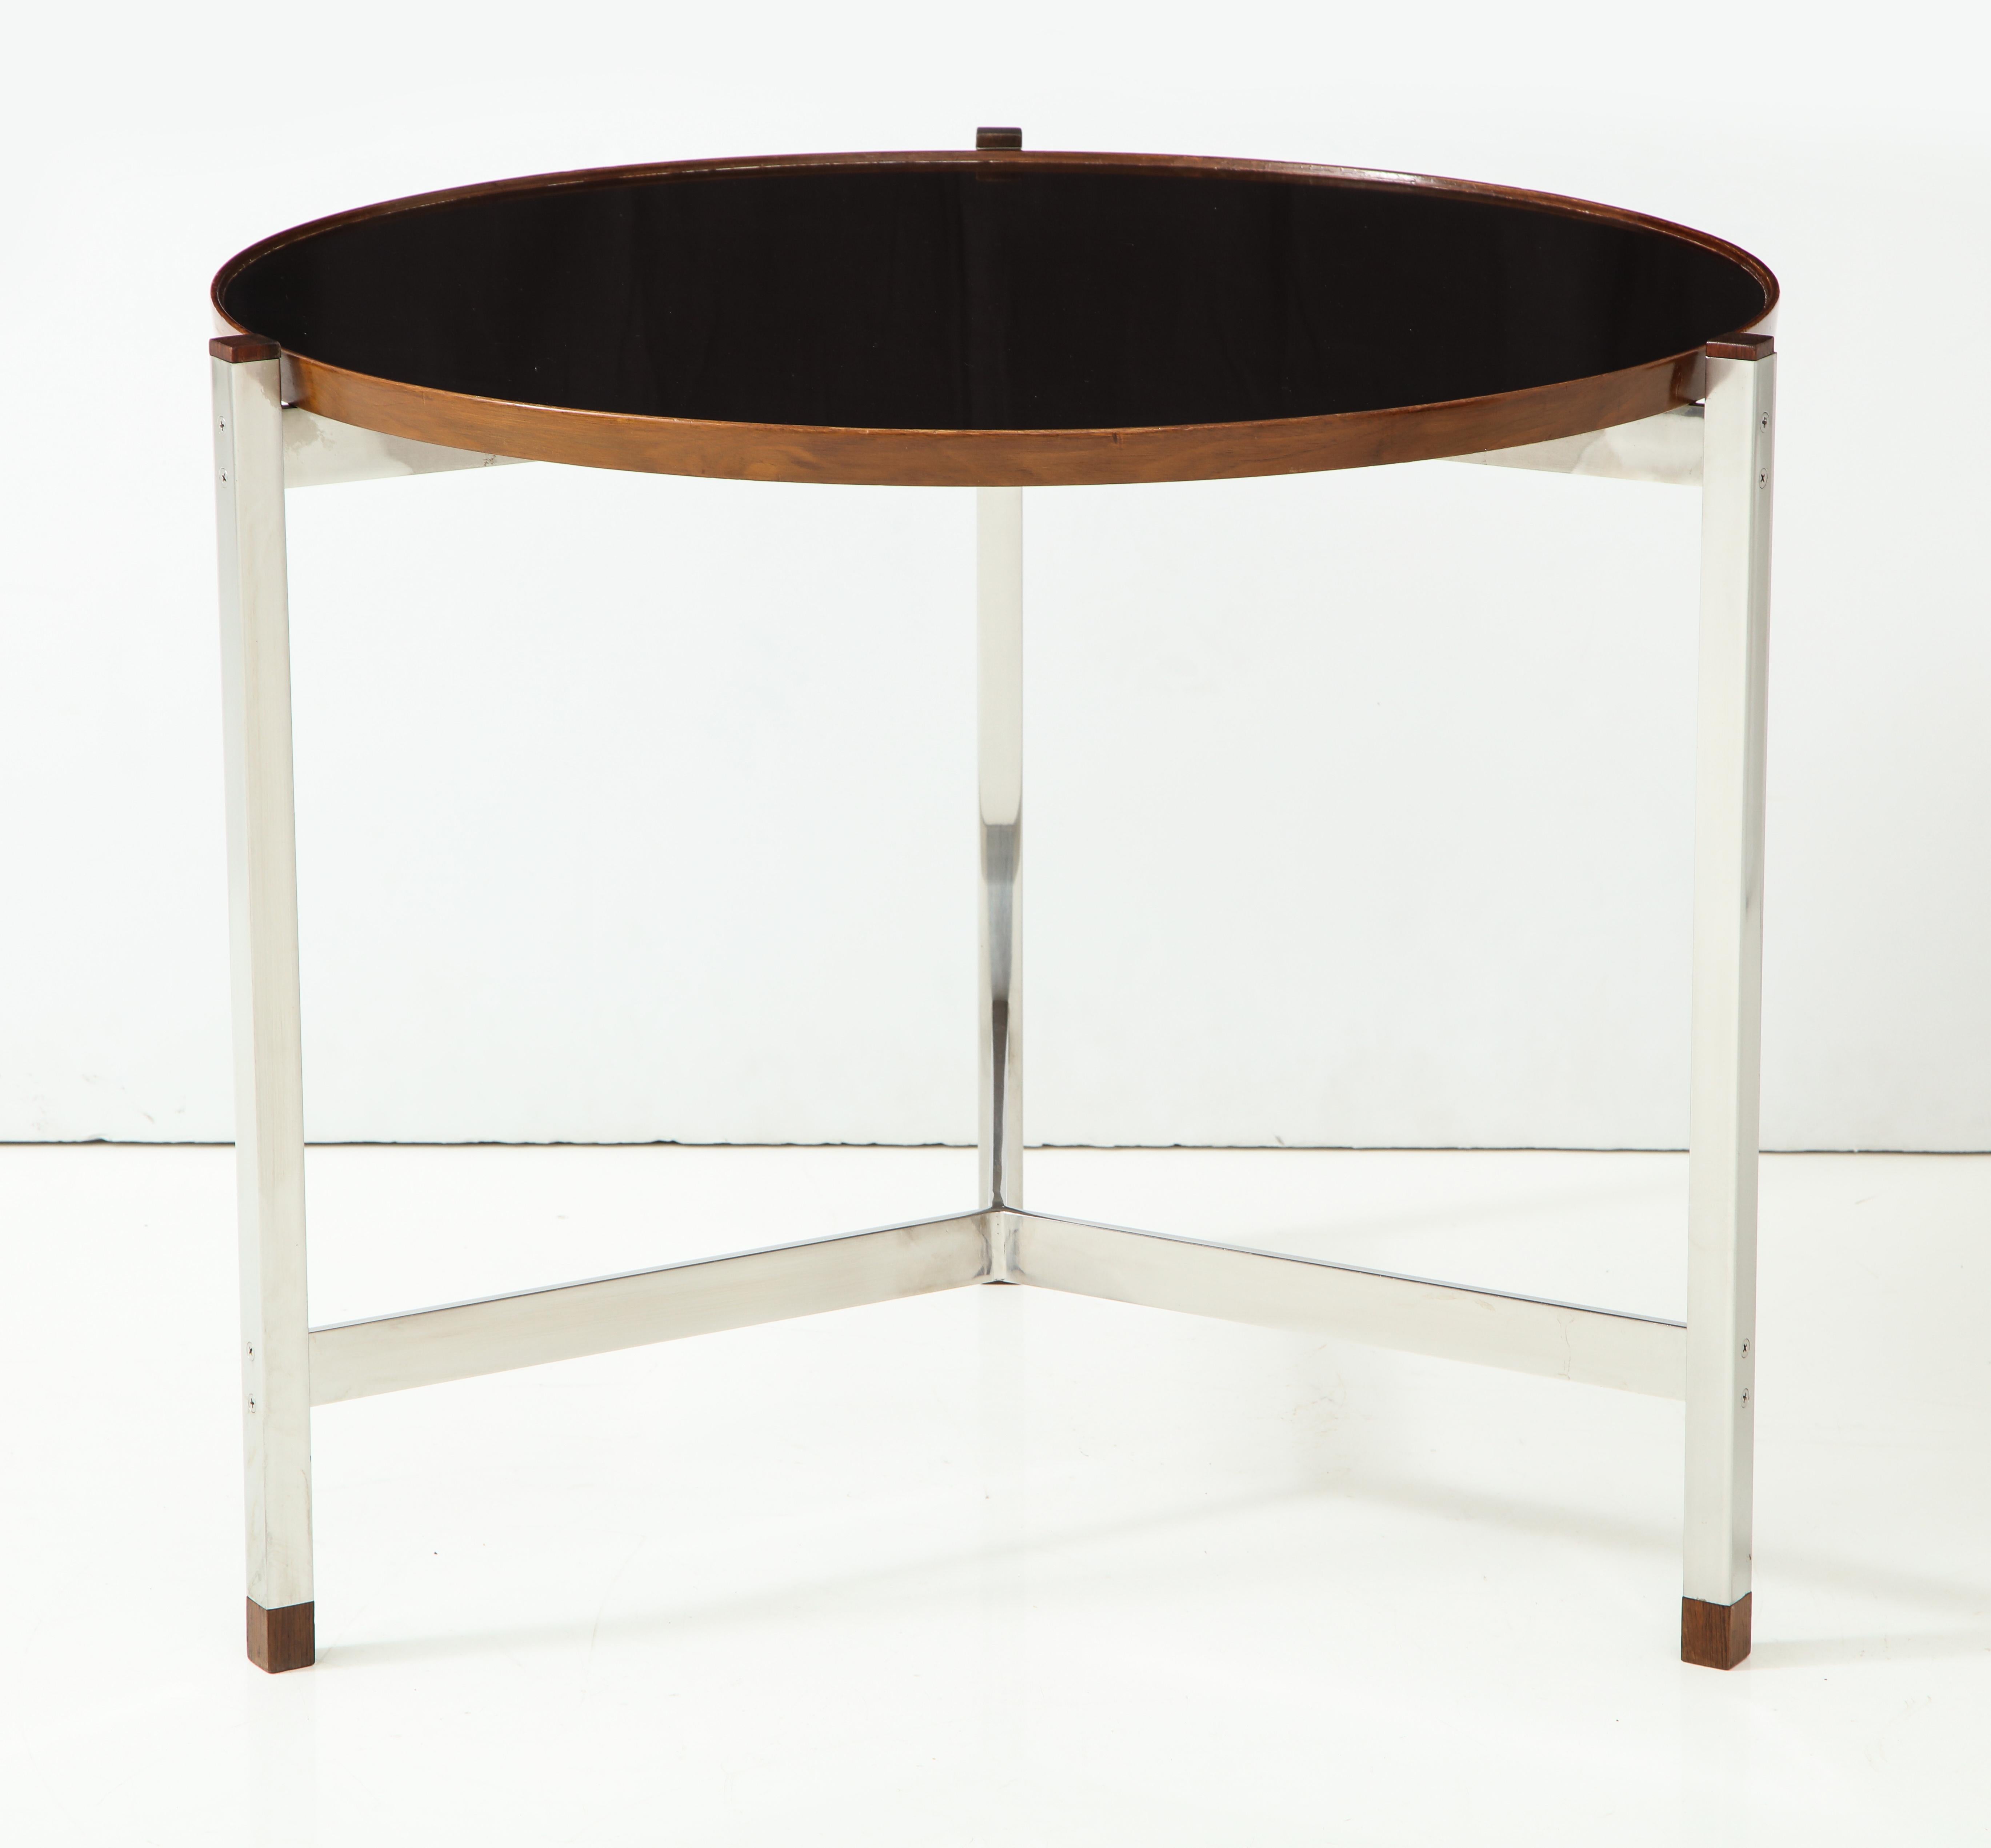 Round, rather large-scaled occasional table with a chromed steel three-leg base with flat cross stretchers and a top of black micarta with a walnut edge. Excellent proportions and details, including original set screws and Macassar ebony caps and